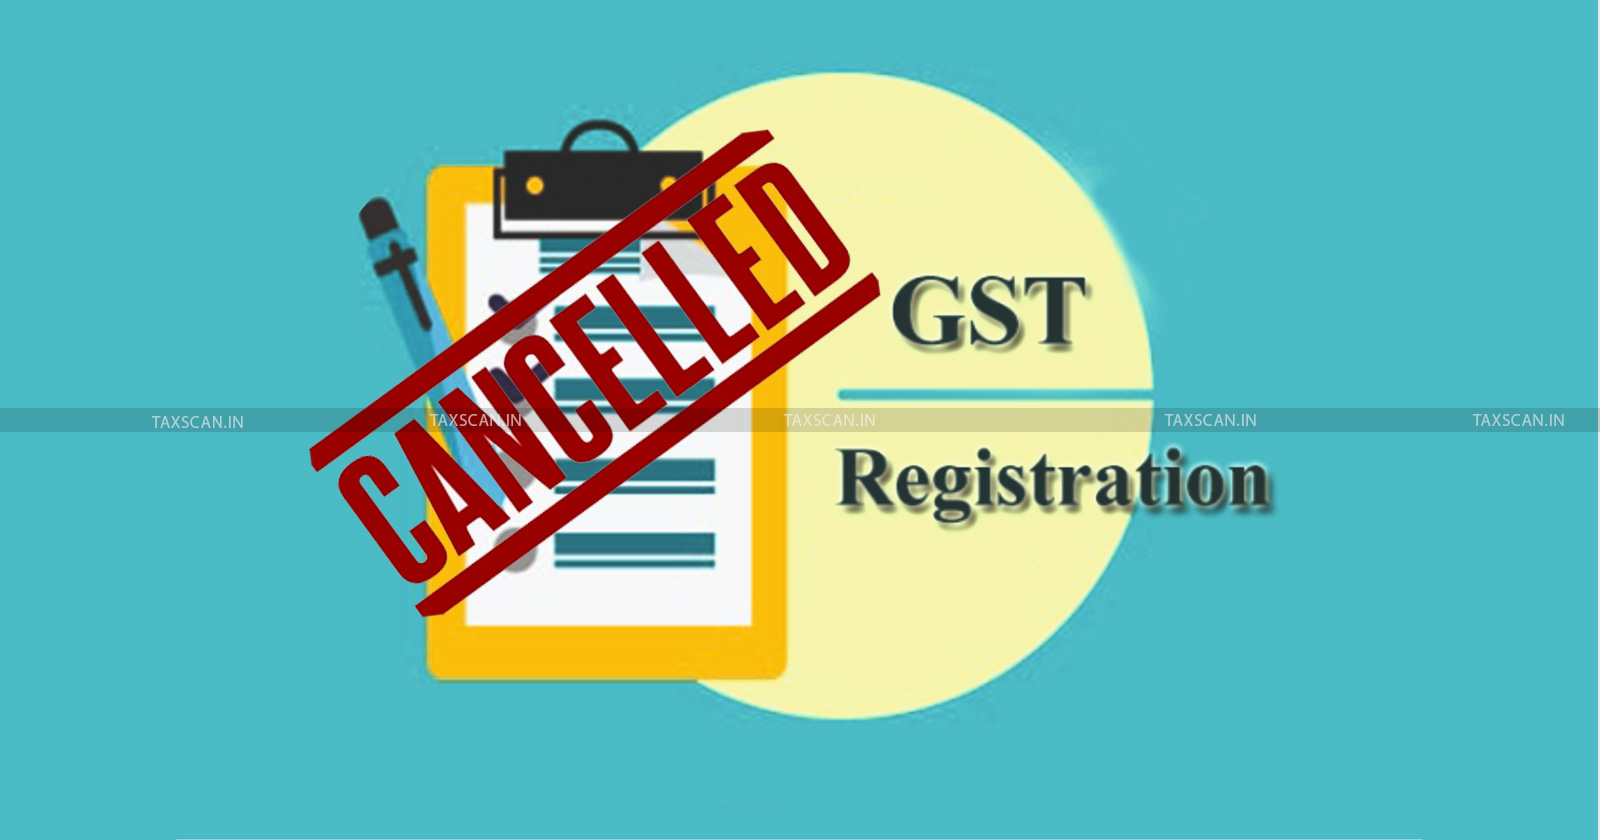 Cancellation of GST Registration - Principal Place of Business -Delhi HC - SCN in Violation -TAXSCAN